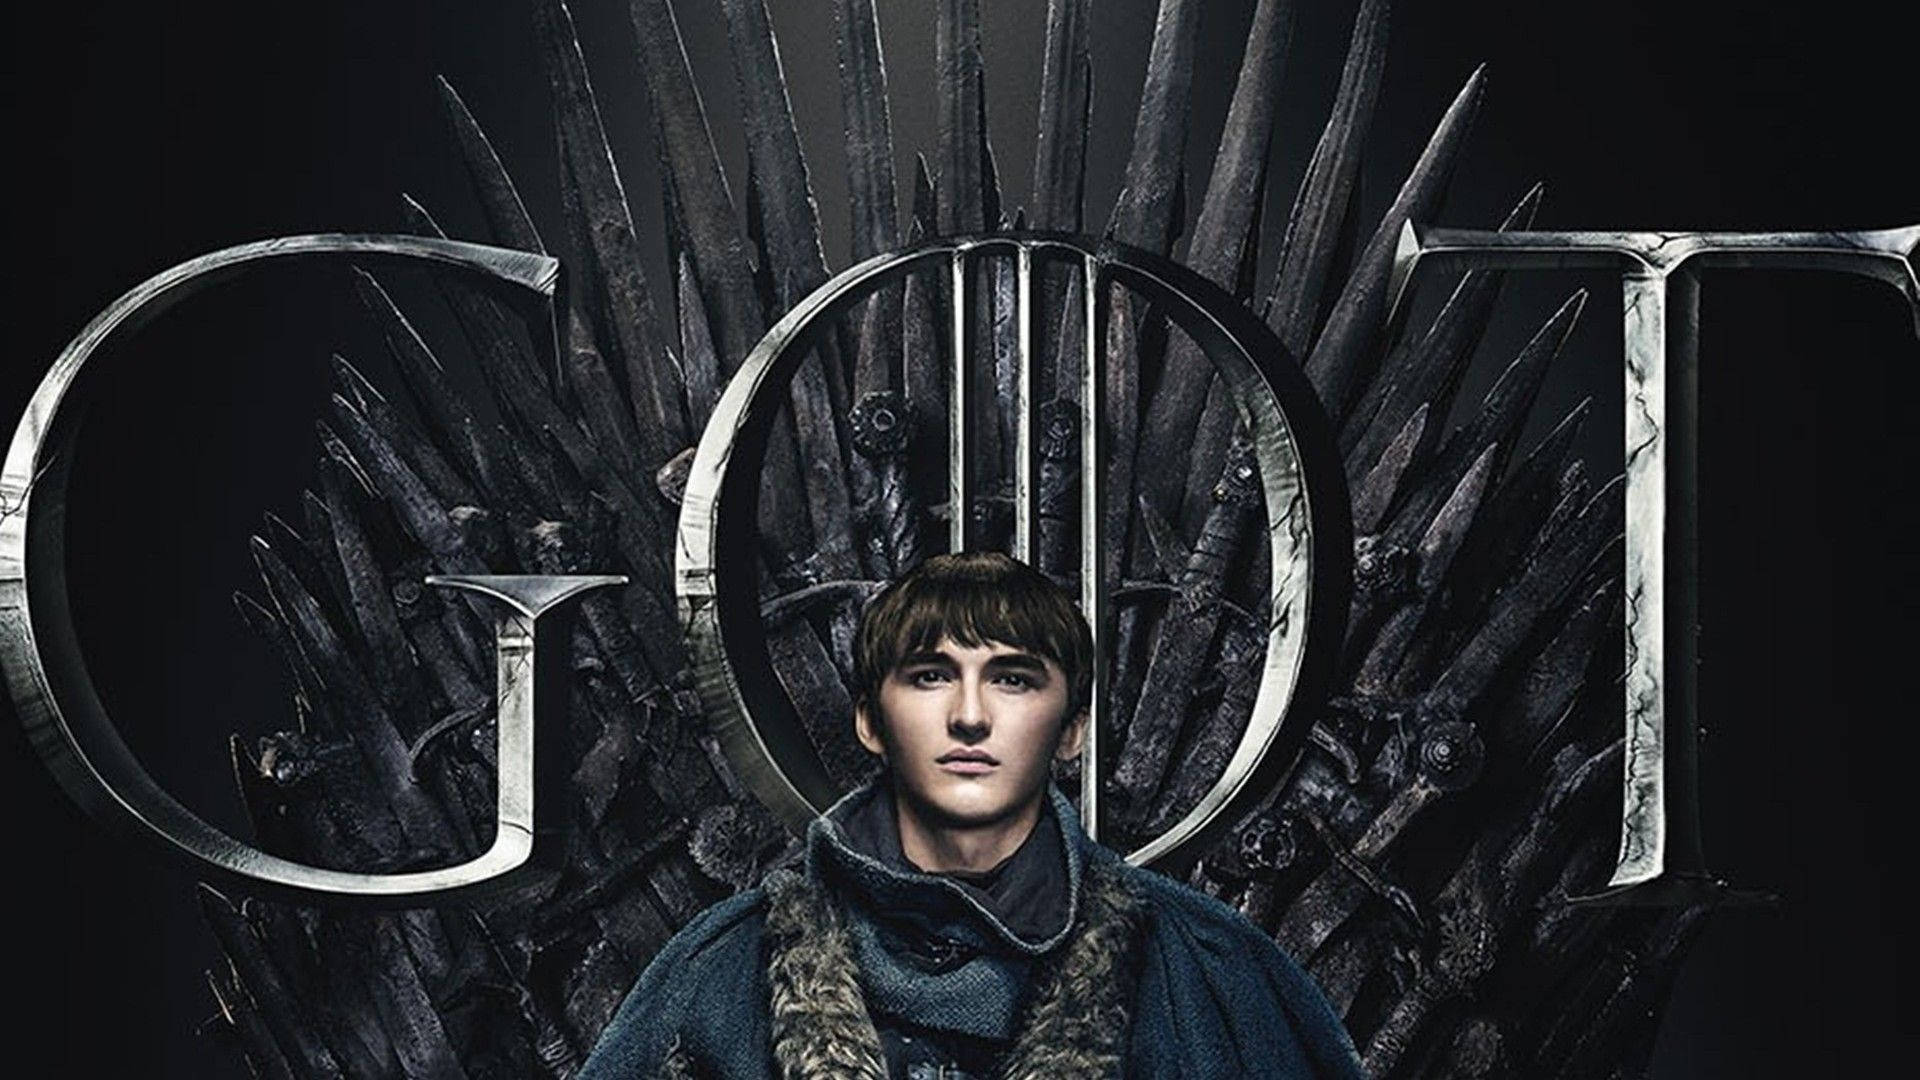 Free Game Of Thrones Wallpaper Downloads, [200+] Game Of Thrones Wallpapers  for FREE 